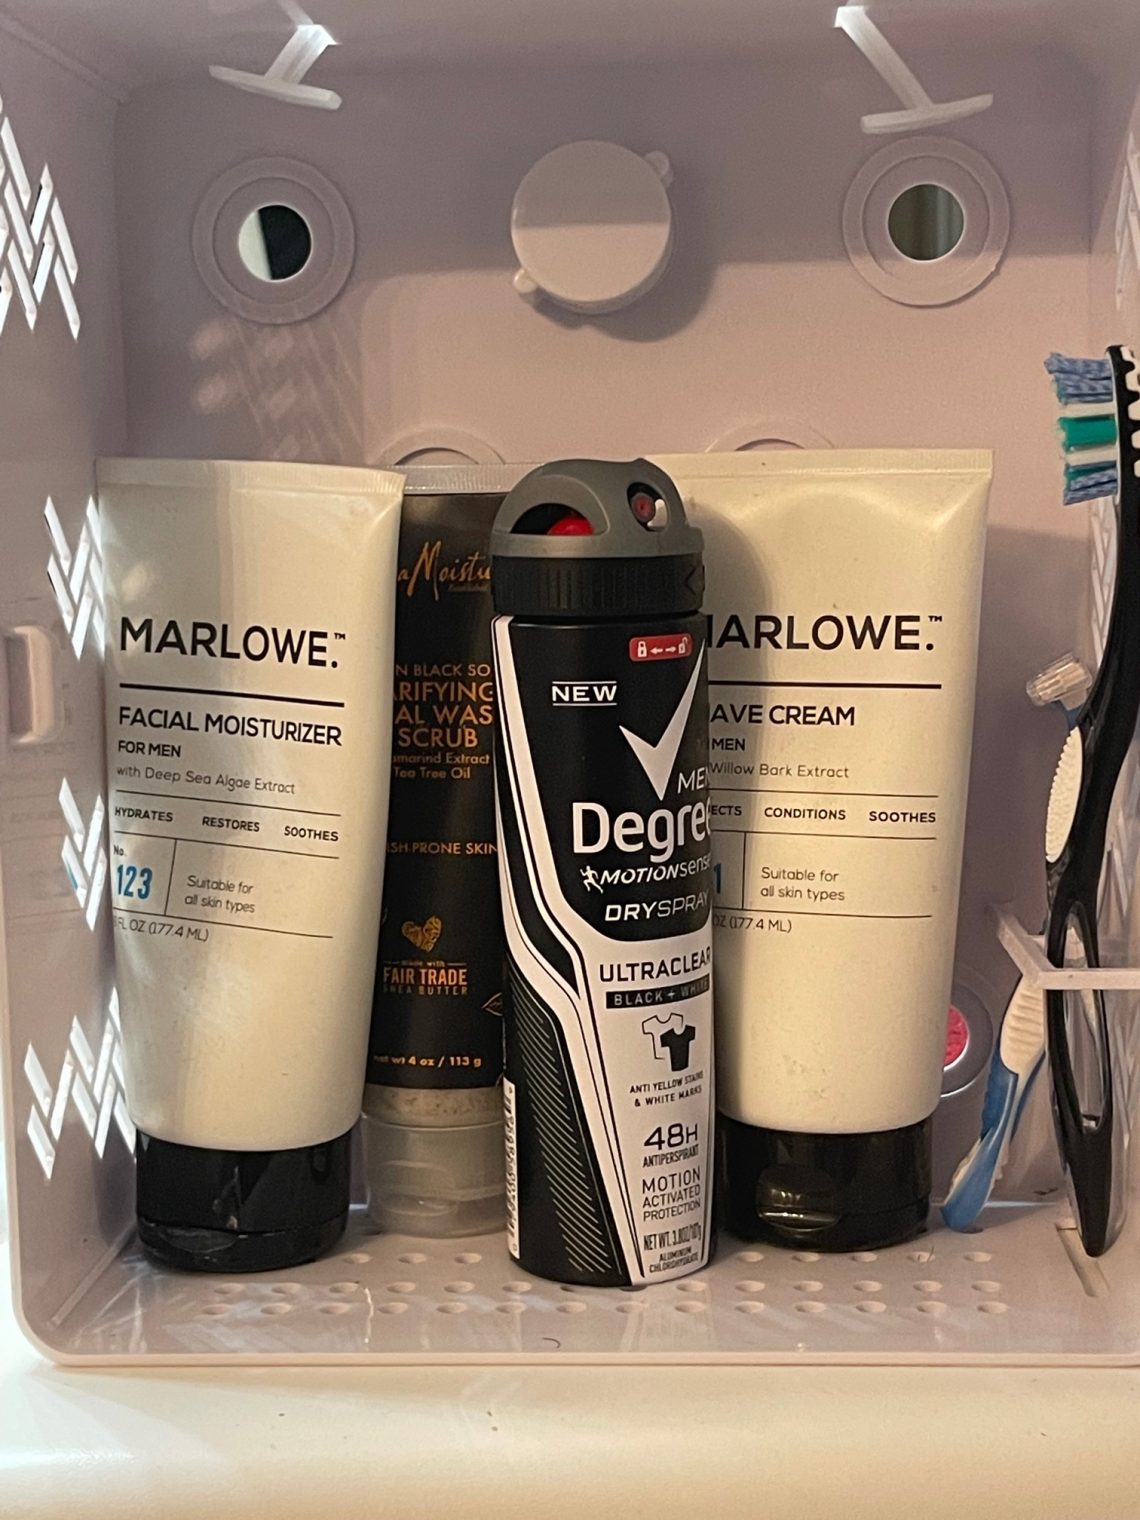 3 Reasons Why You Should Purchase the Shower Caddy Locker